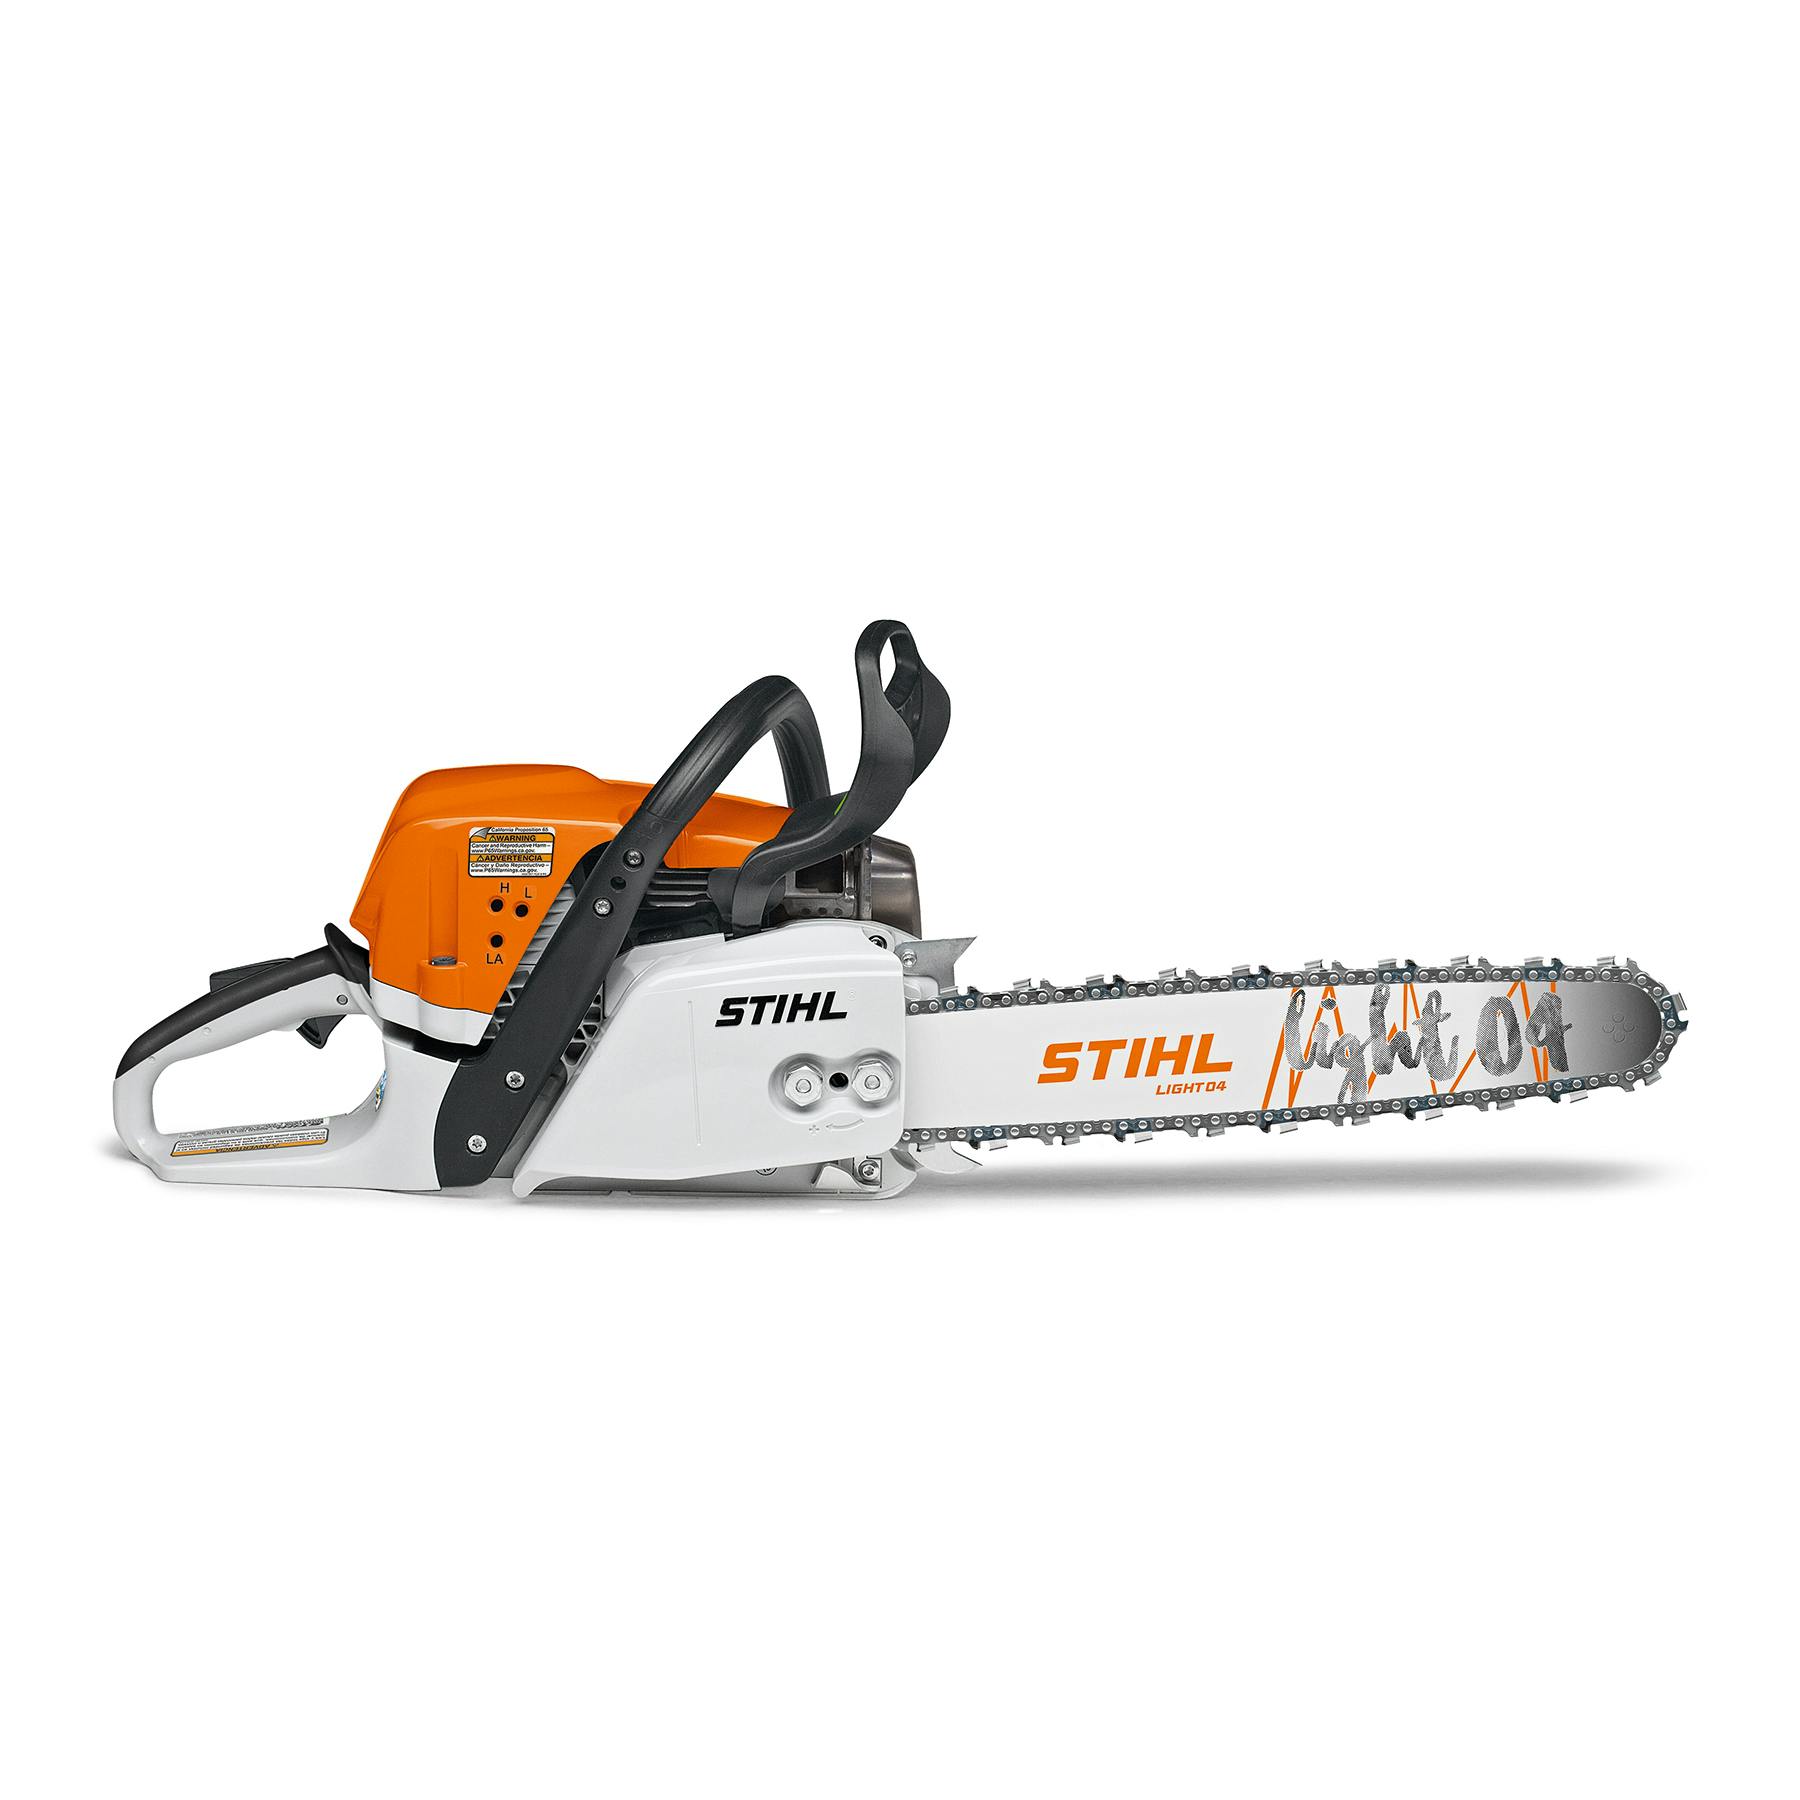 018 Stihl Chainsaw Complete Service Workshop Repair Manual 017 